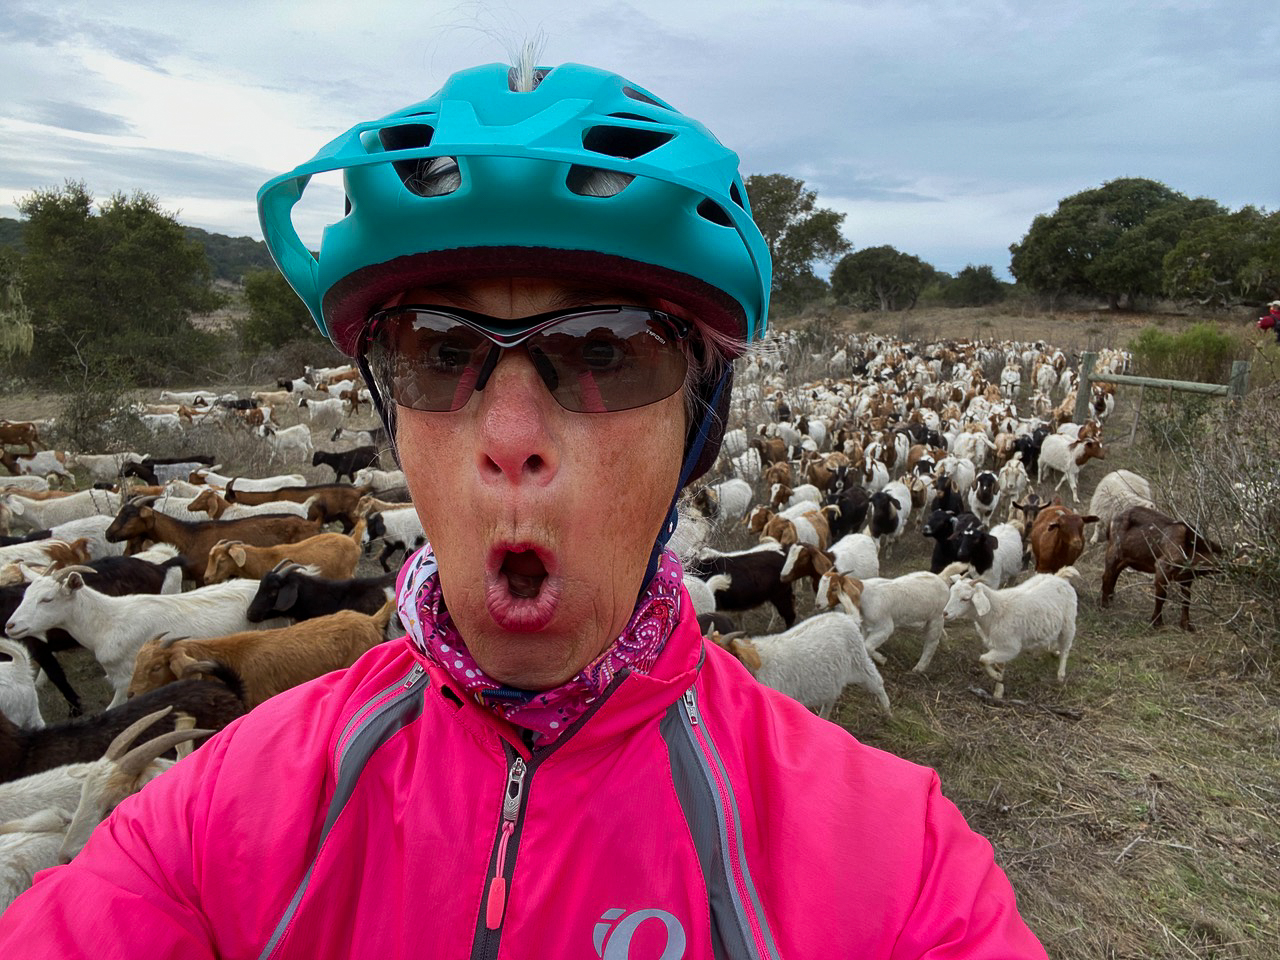 19_Look_out_the_Goats_are_chasing_us.jpg